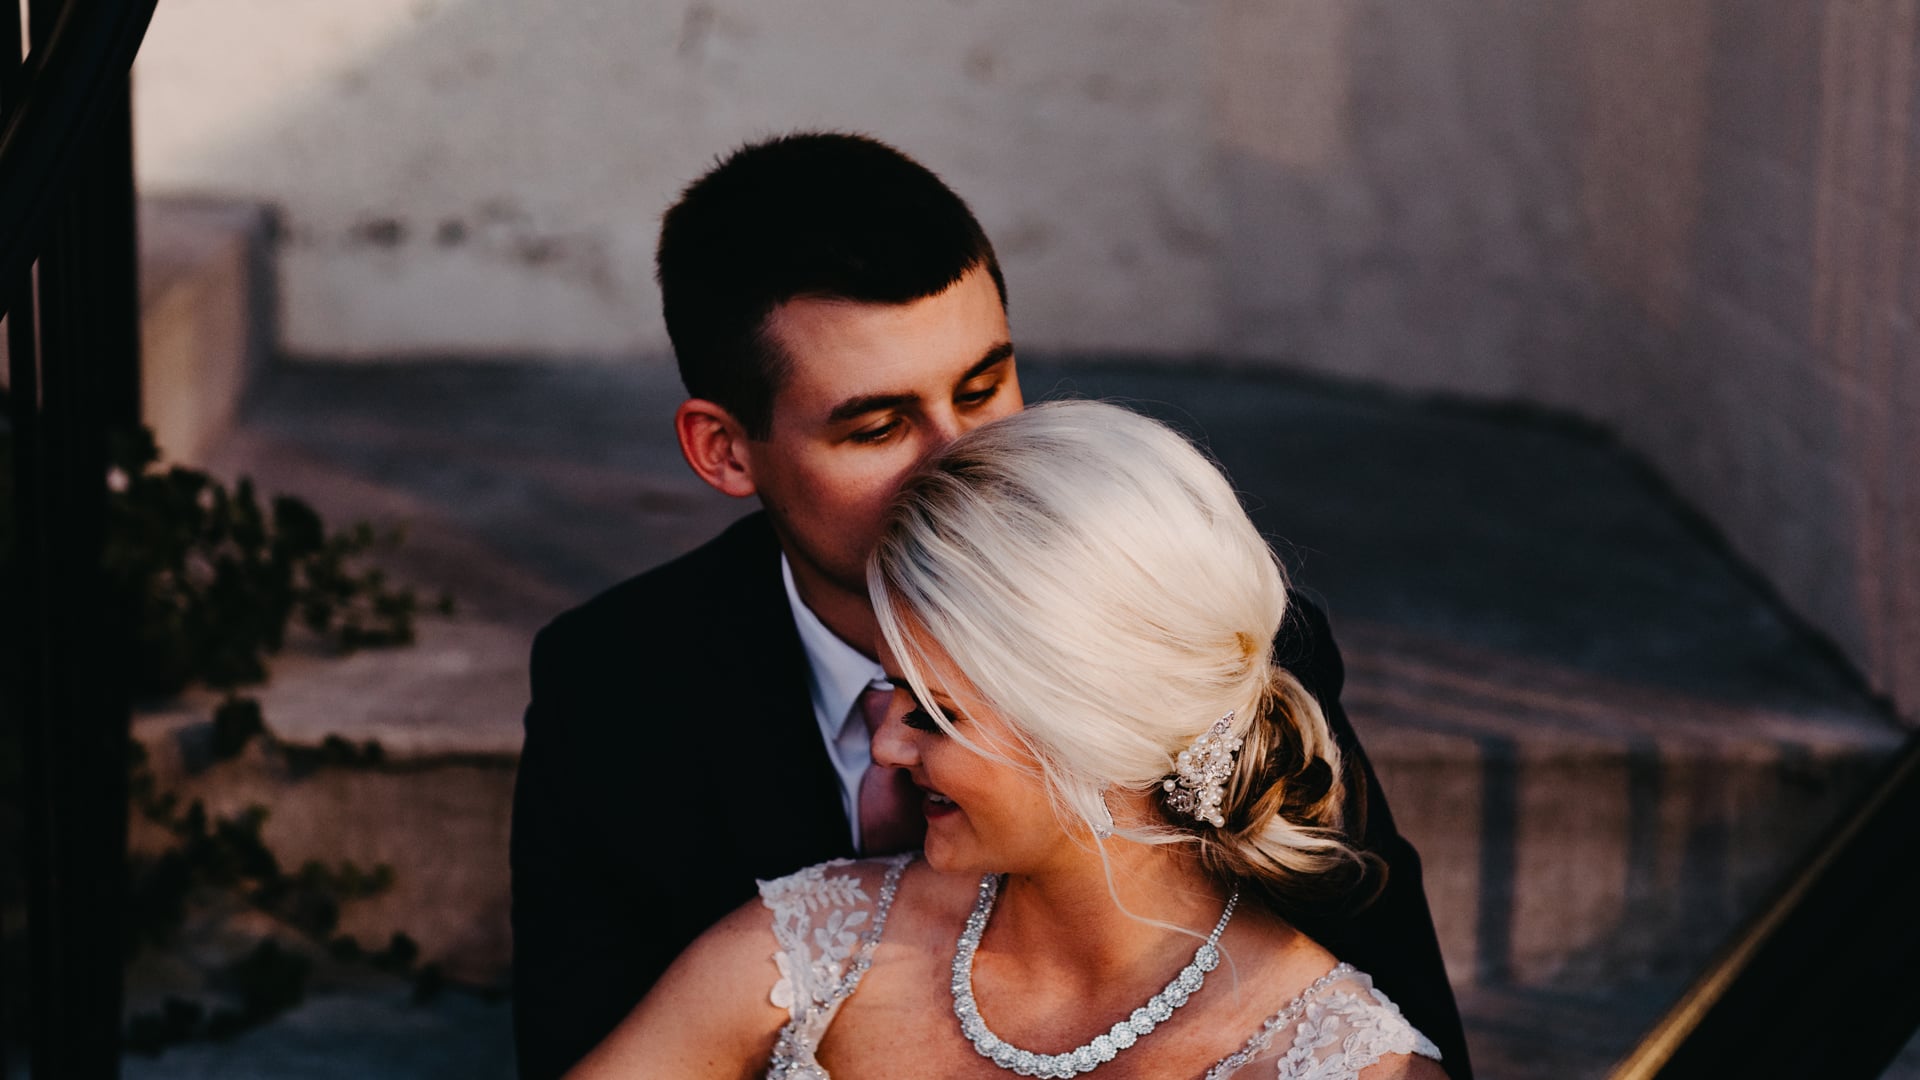 Keely + Wes | The Charleston | Bowling Green, KY